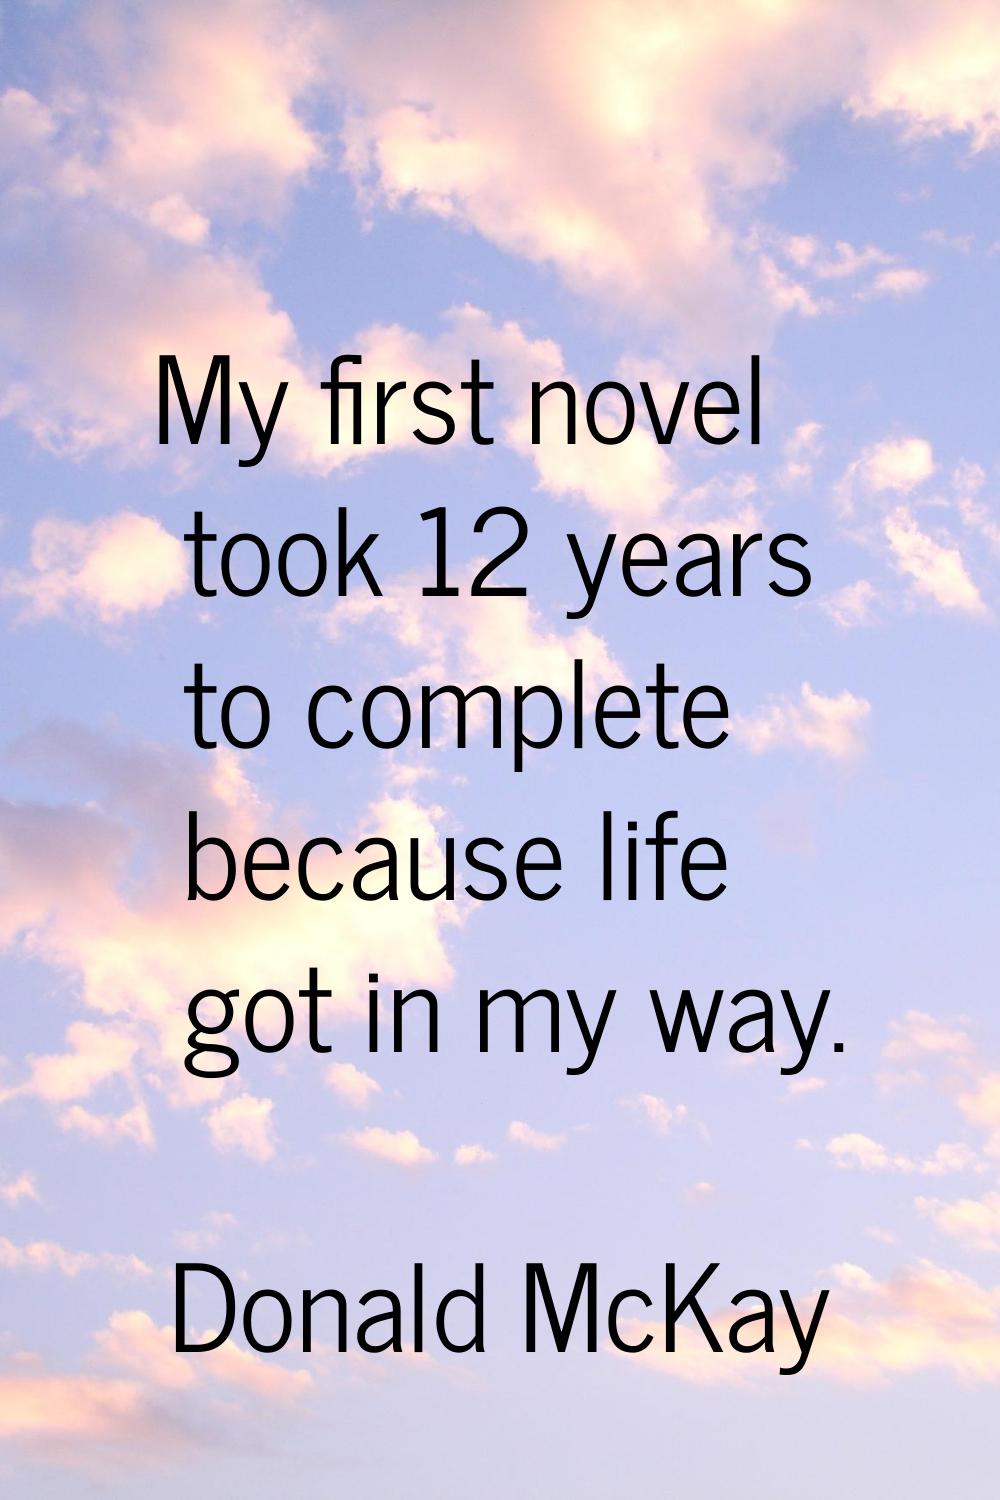 My first novel took 12 years to complete because life got in my way.